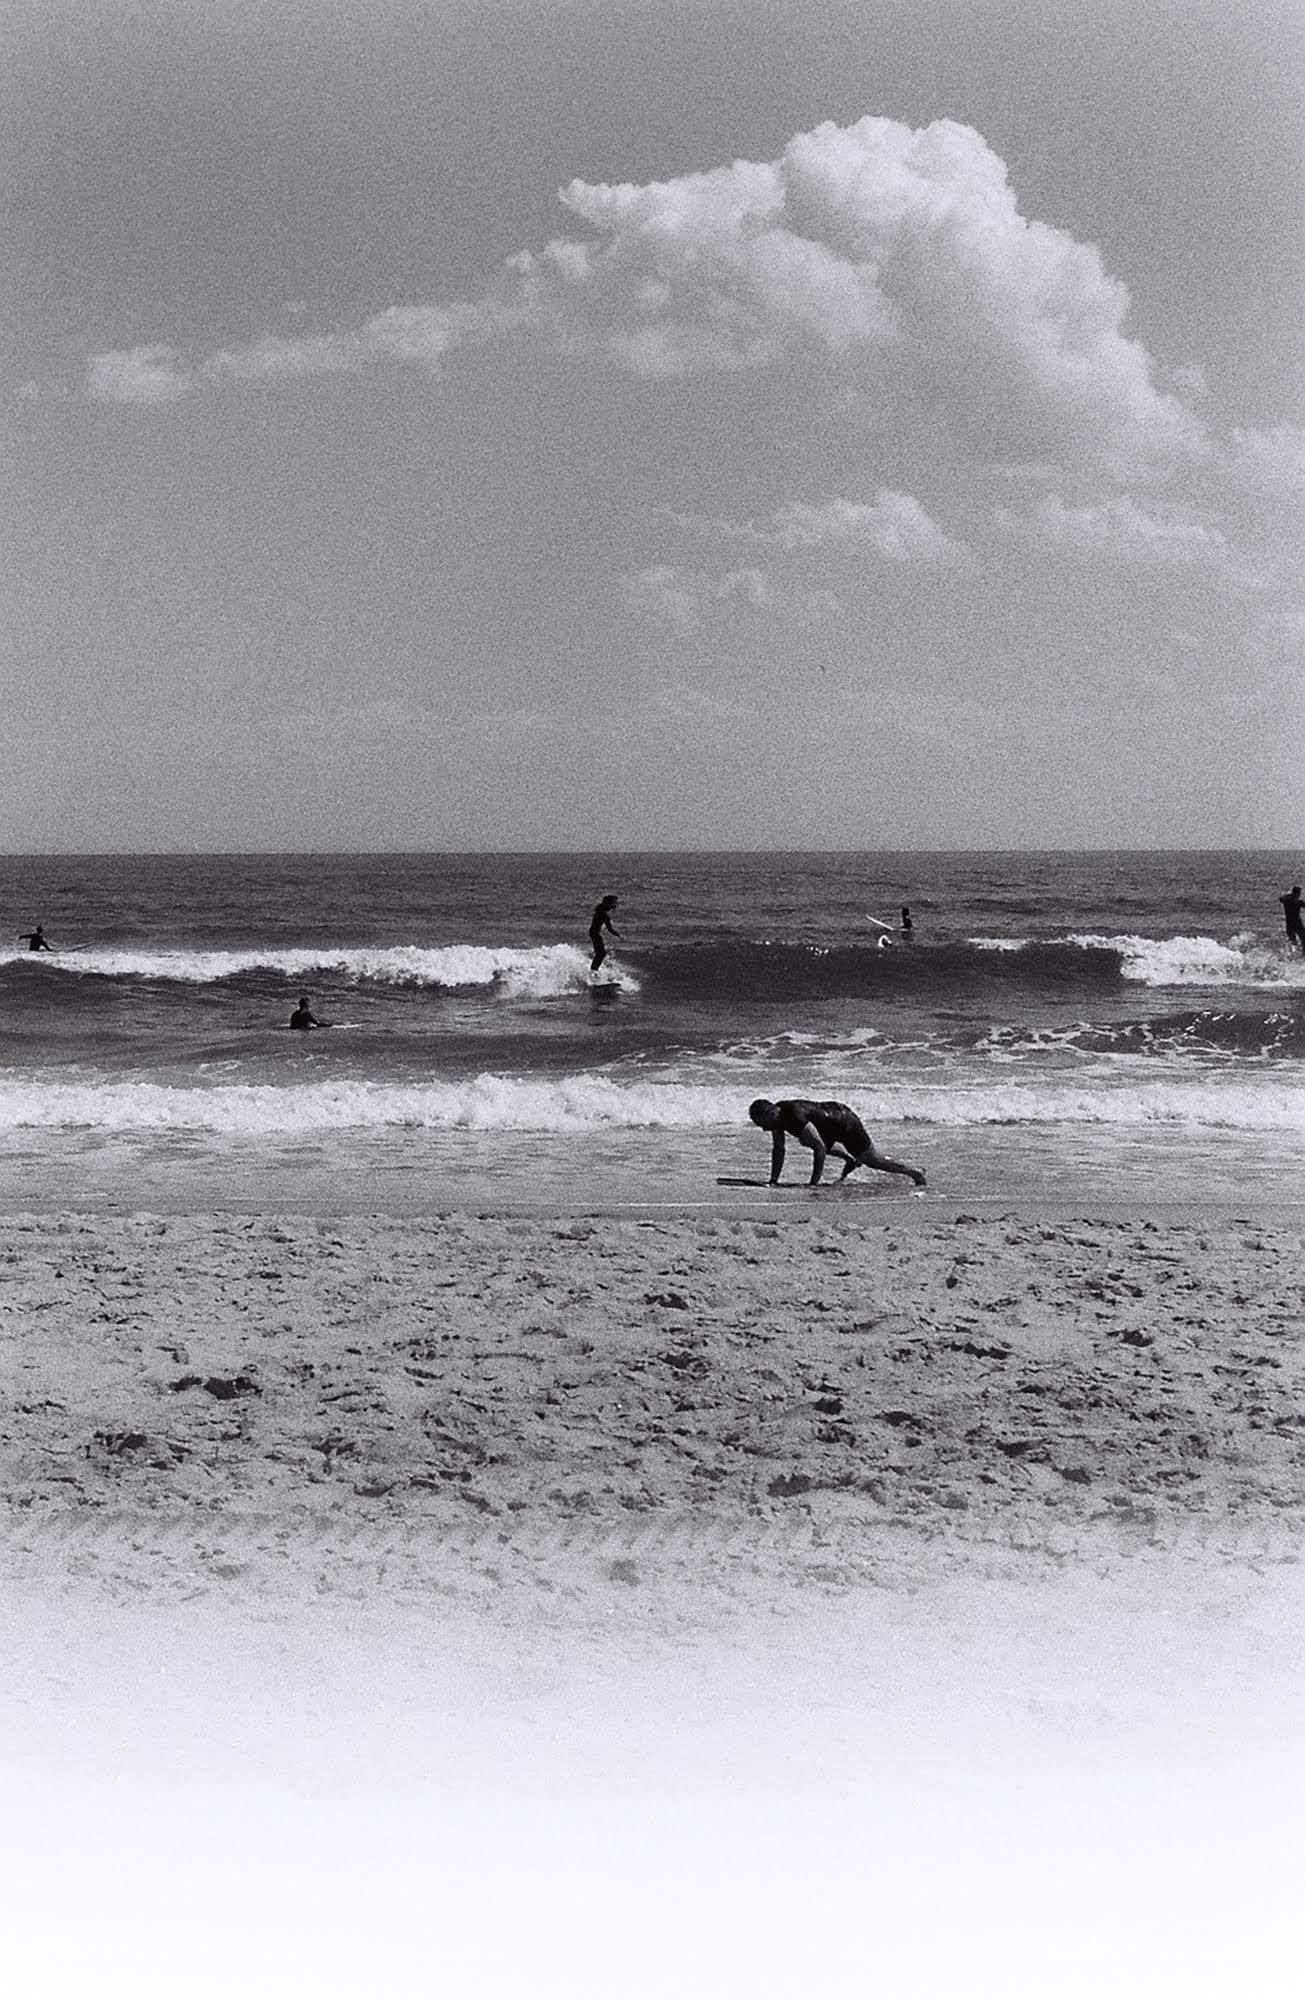 A grainy black and white photograph of people on the beach.